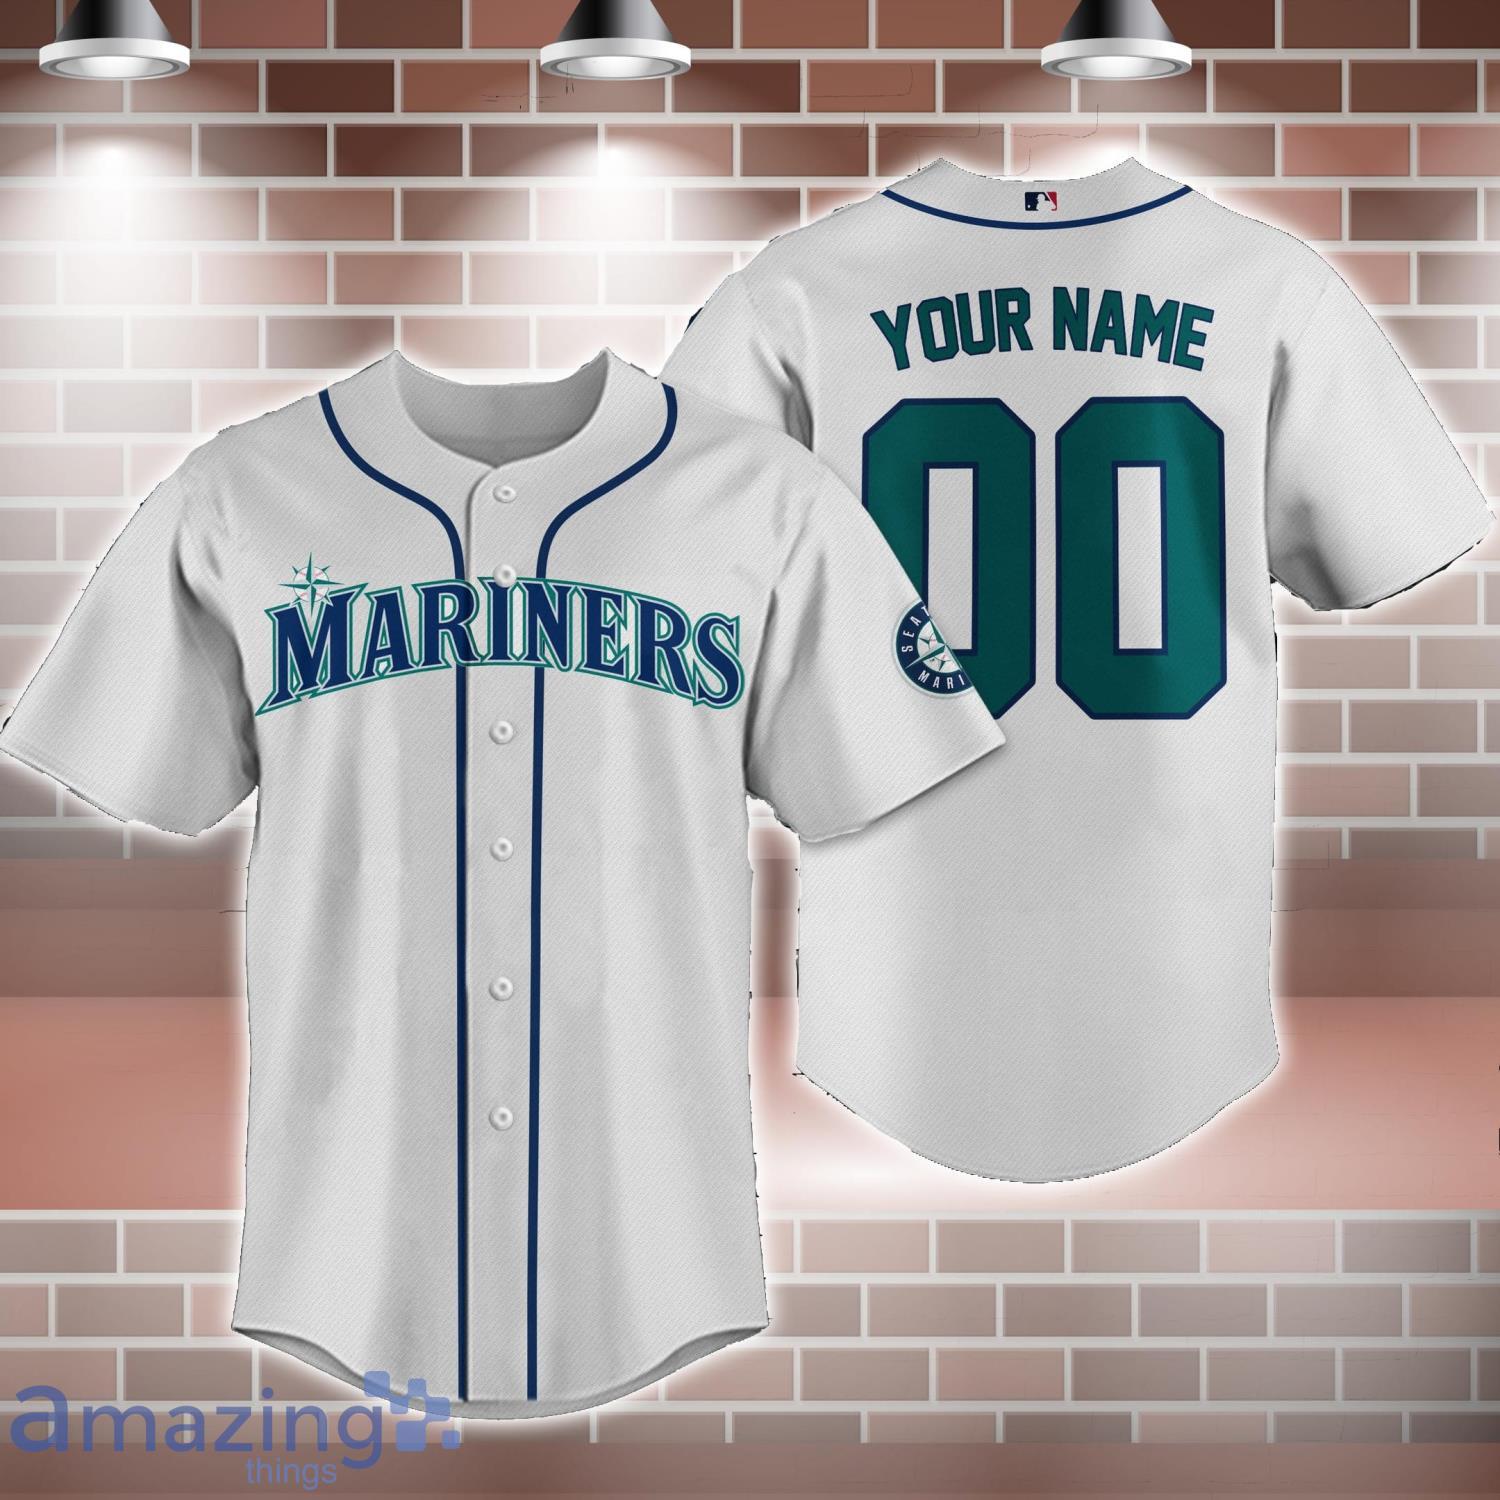 Mariners Personalized Youth Jersey